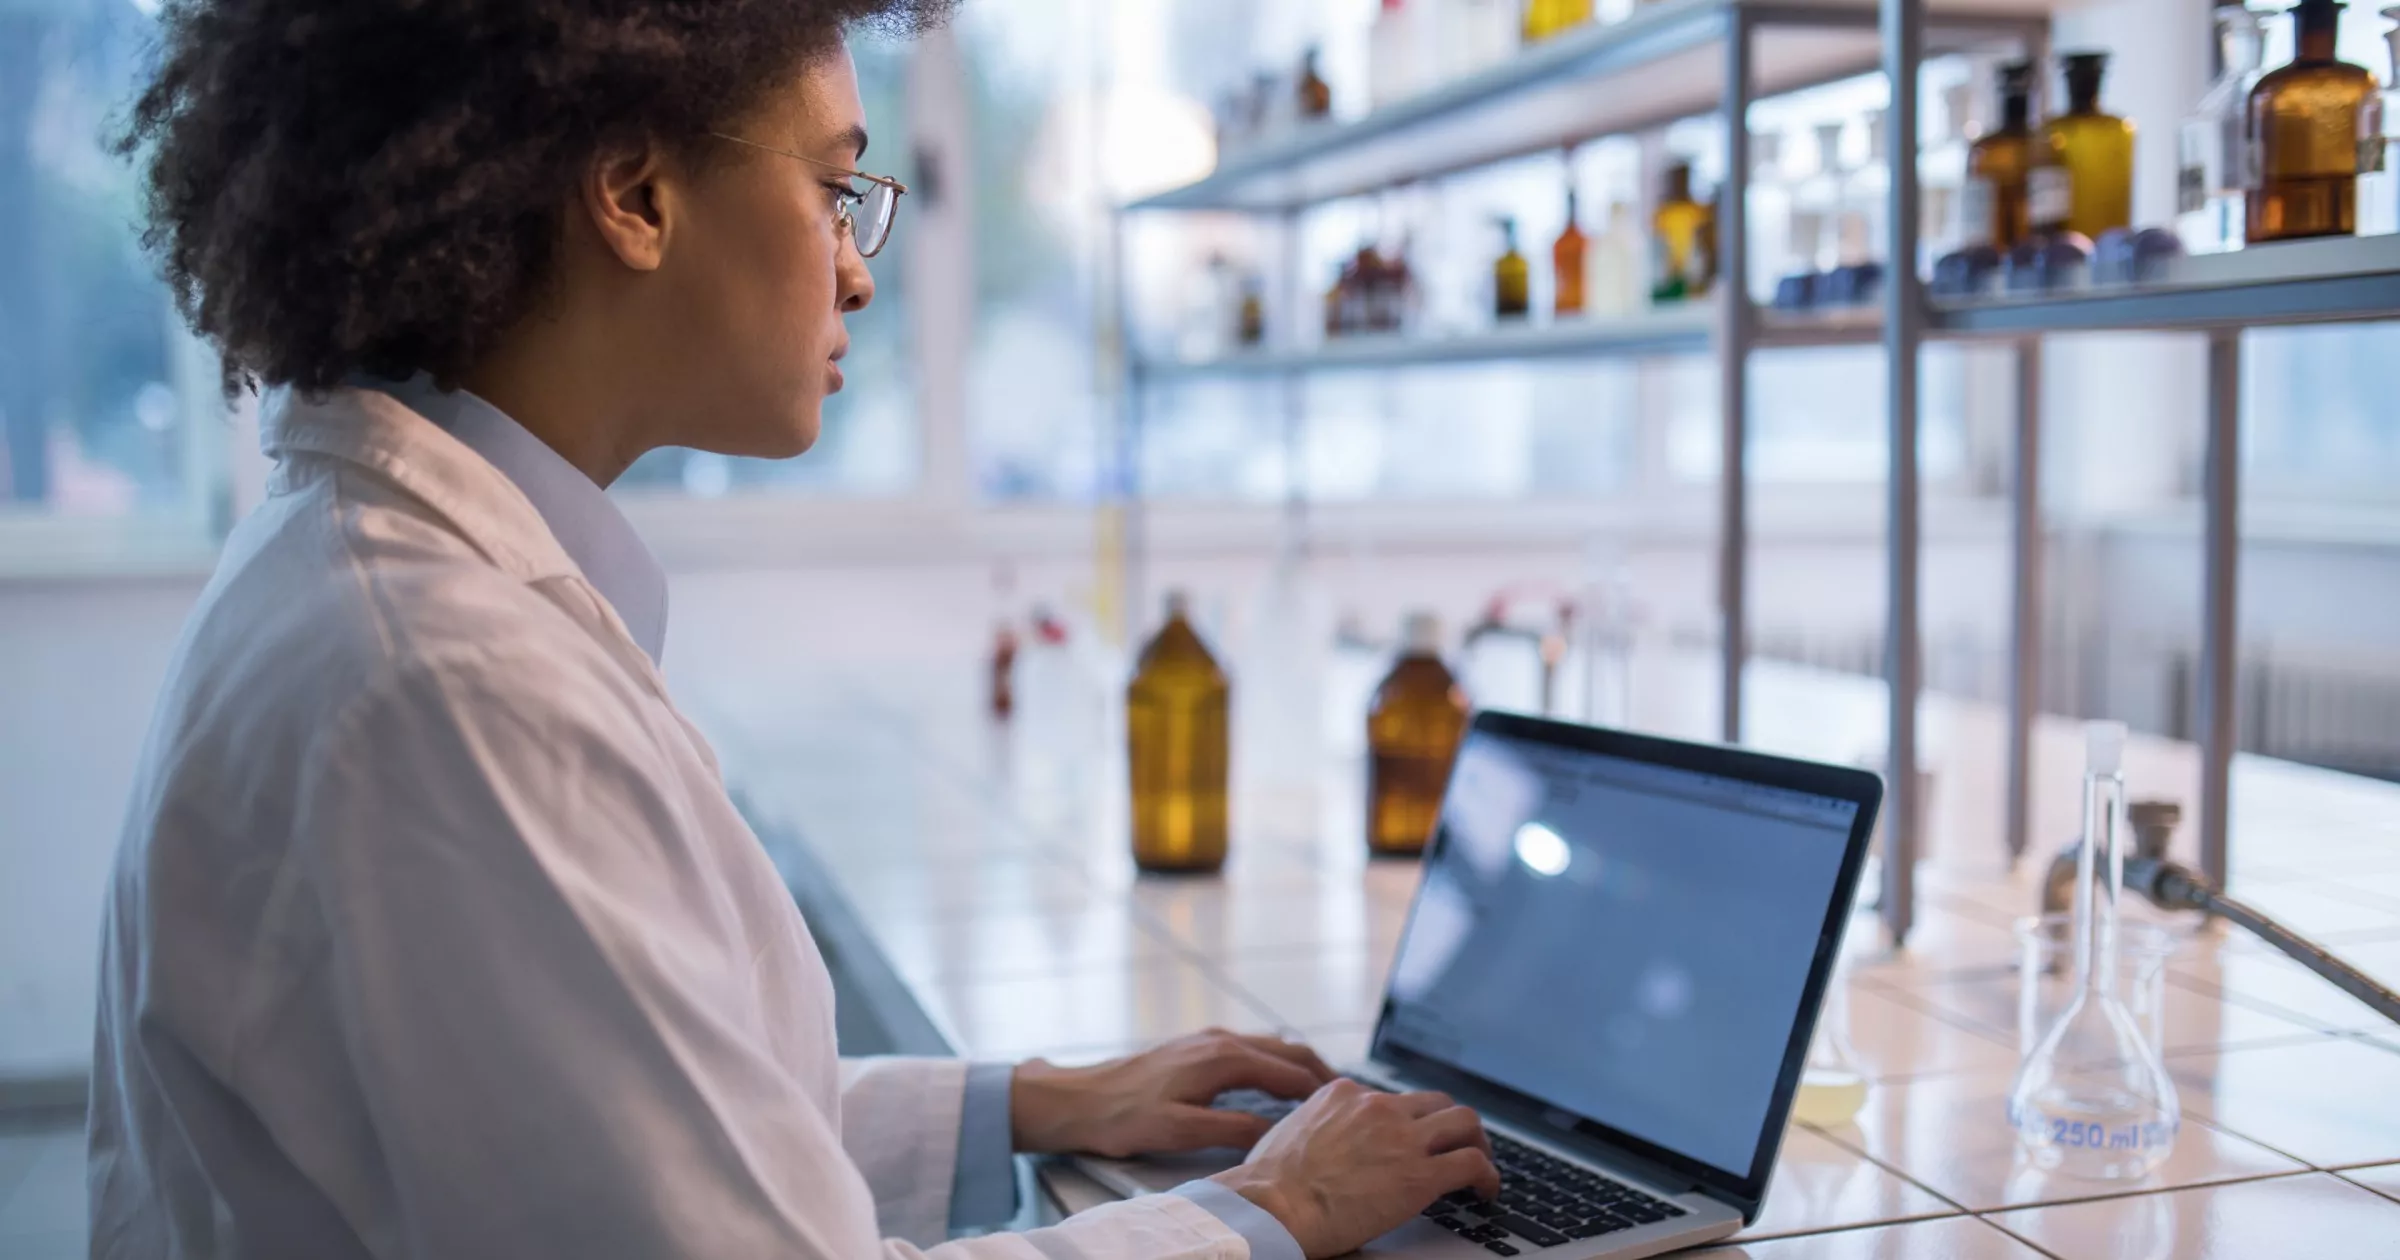 Doctor working on laptop with medicine bottles and beakers on shelves